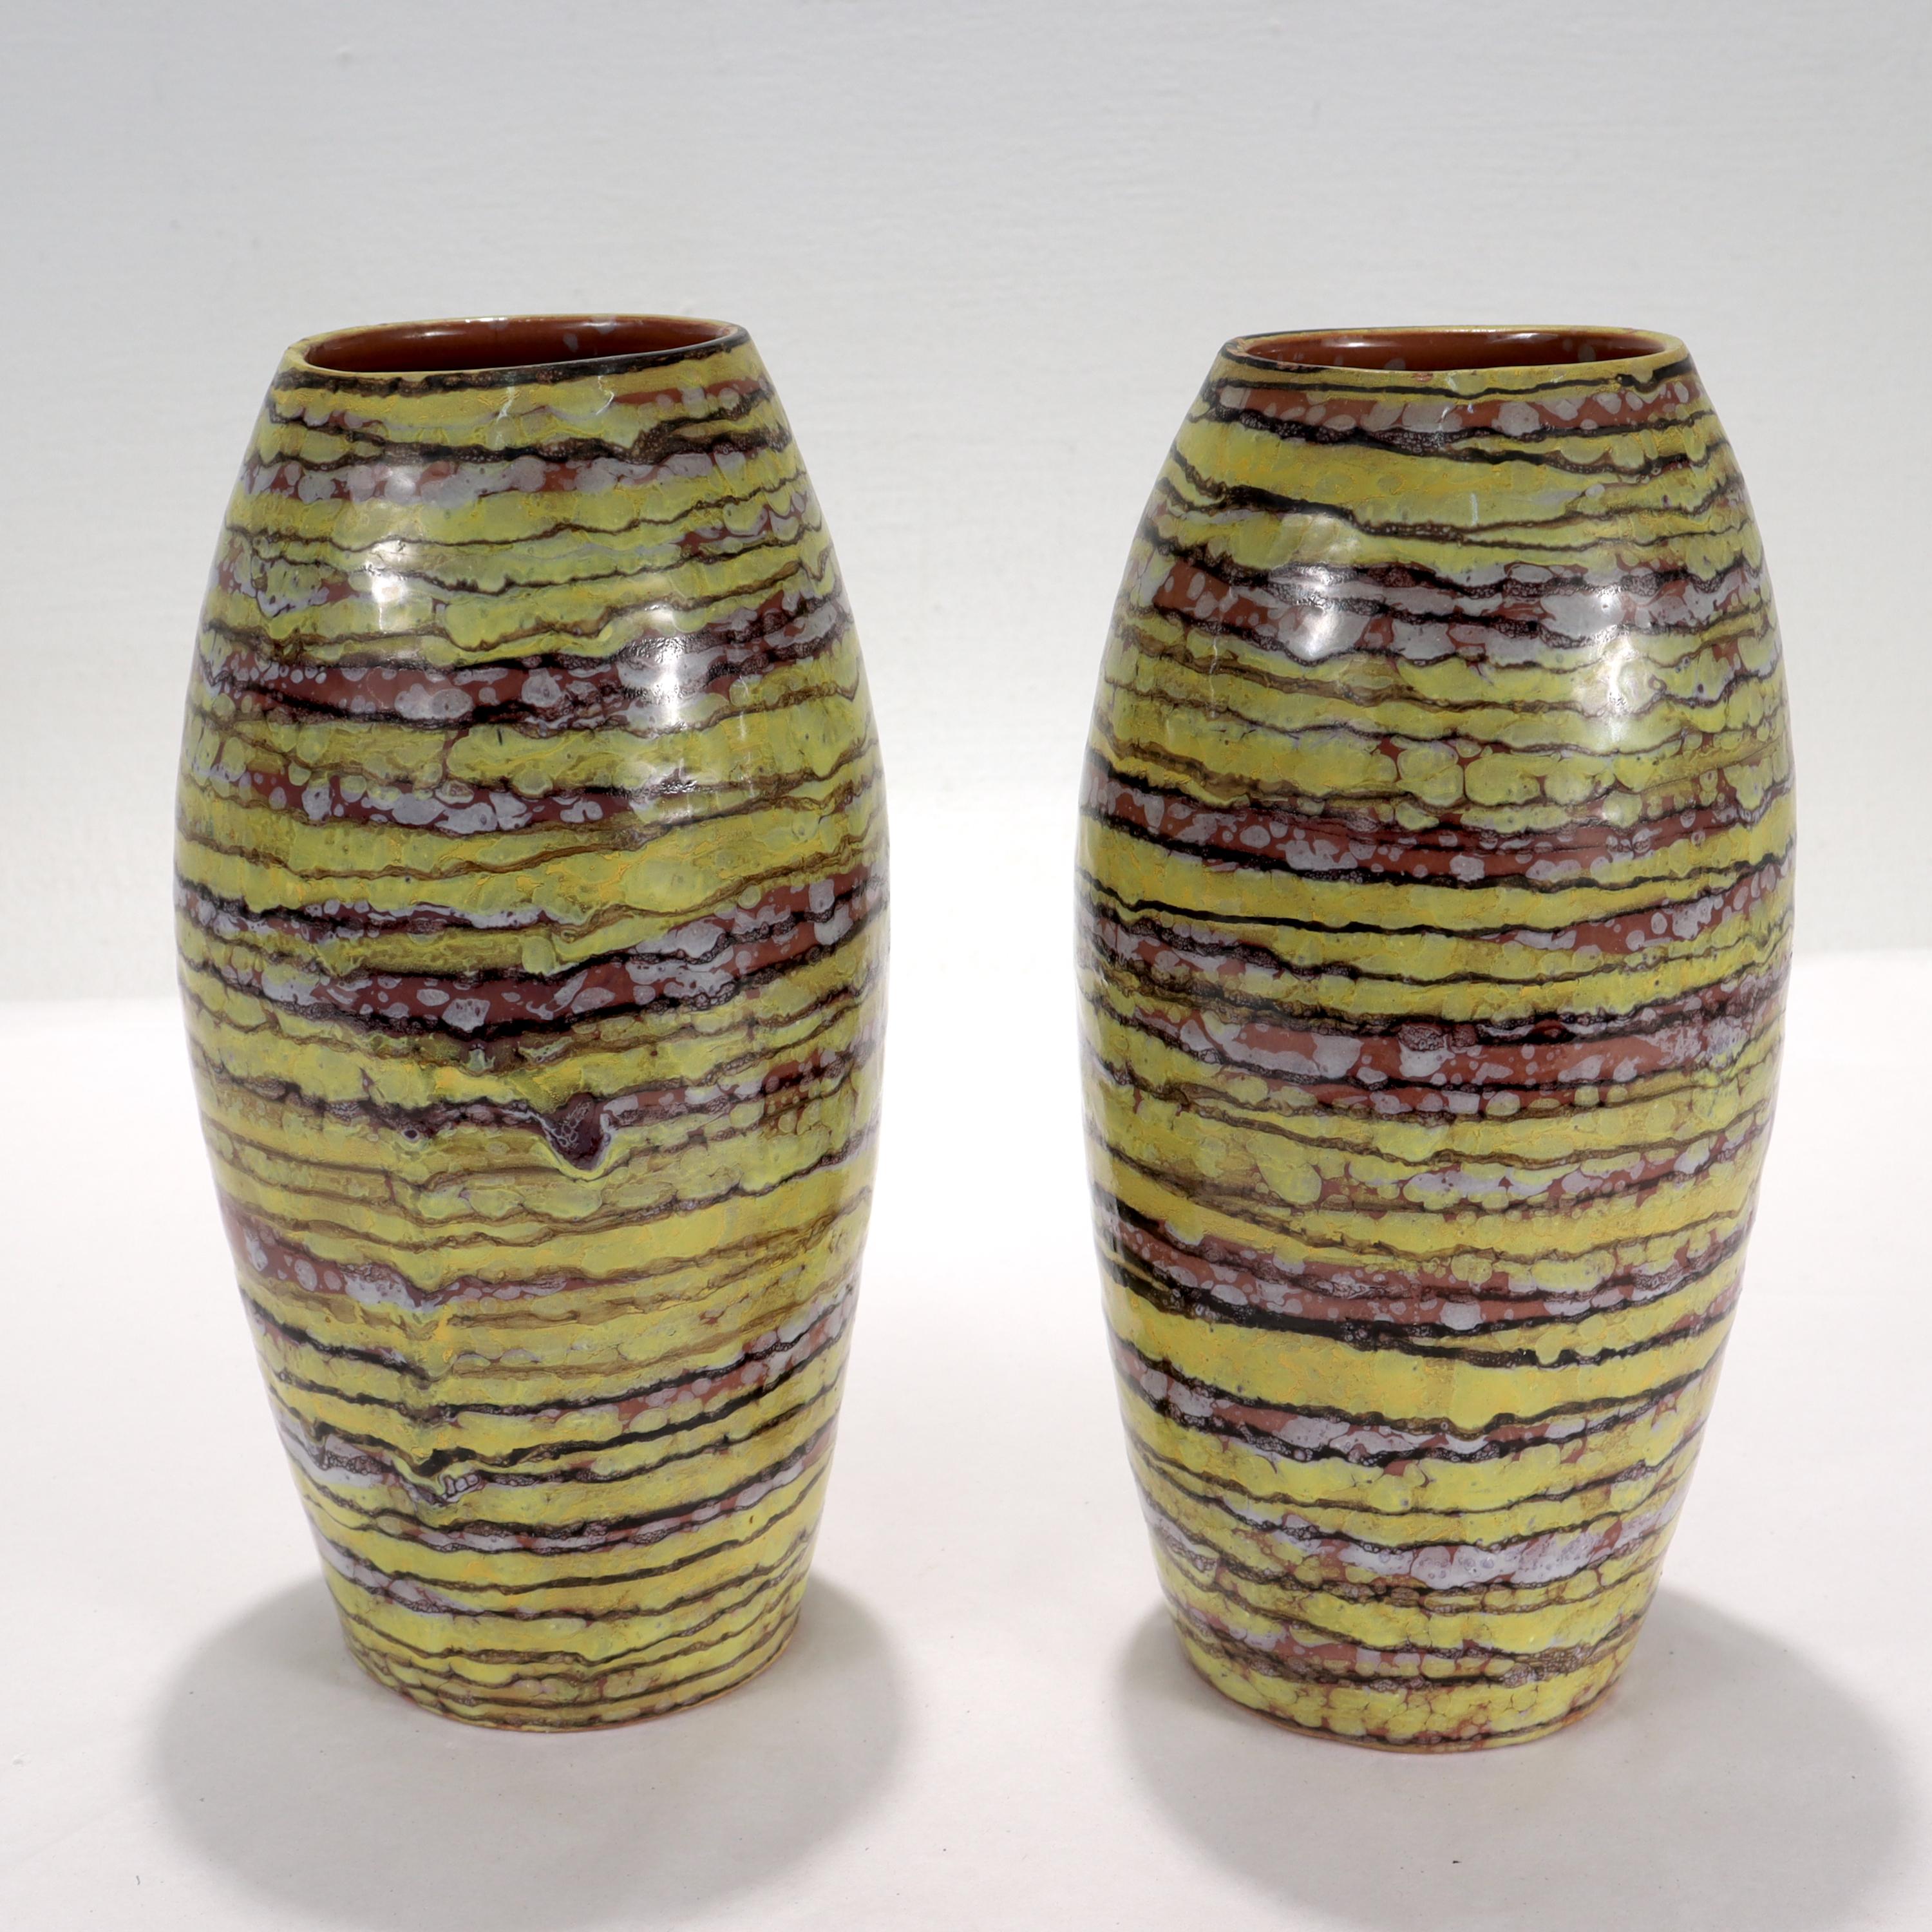 Pair of Italian Mid-Century Modern Striped Terracotta Pottery Vases  In Good Condition For Sale In Philadelphia, PA